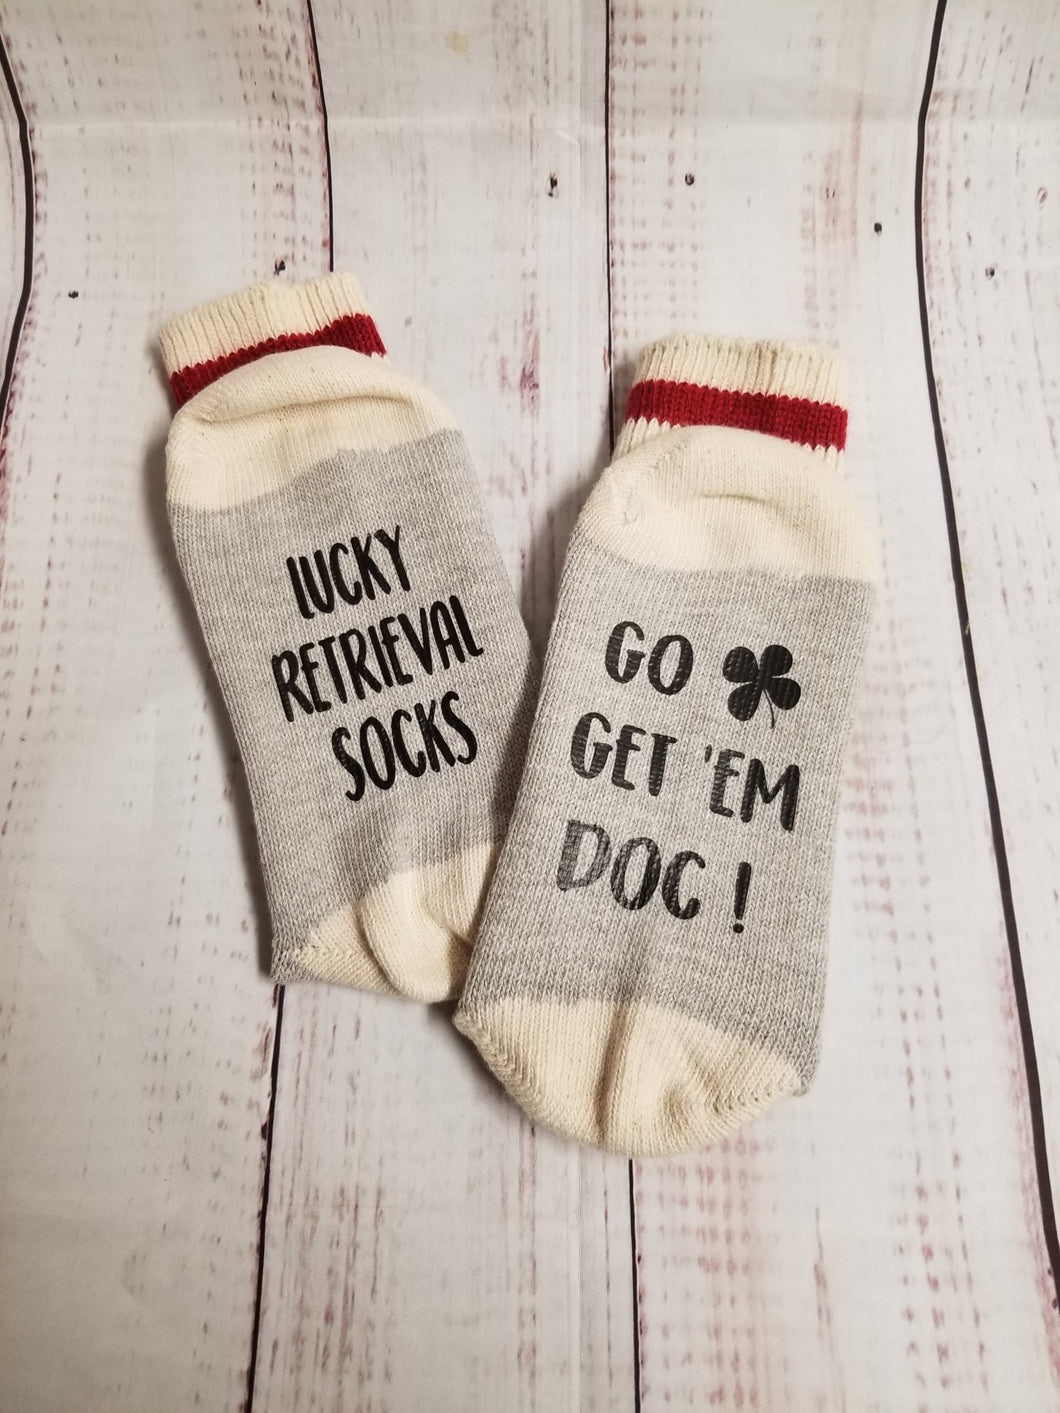 Go get 'em Doc, Lucky Retrieval Socks - My Other Child / Blooms n' Rooms